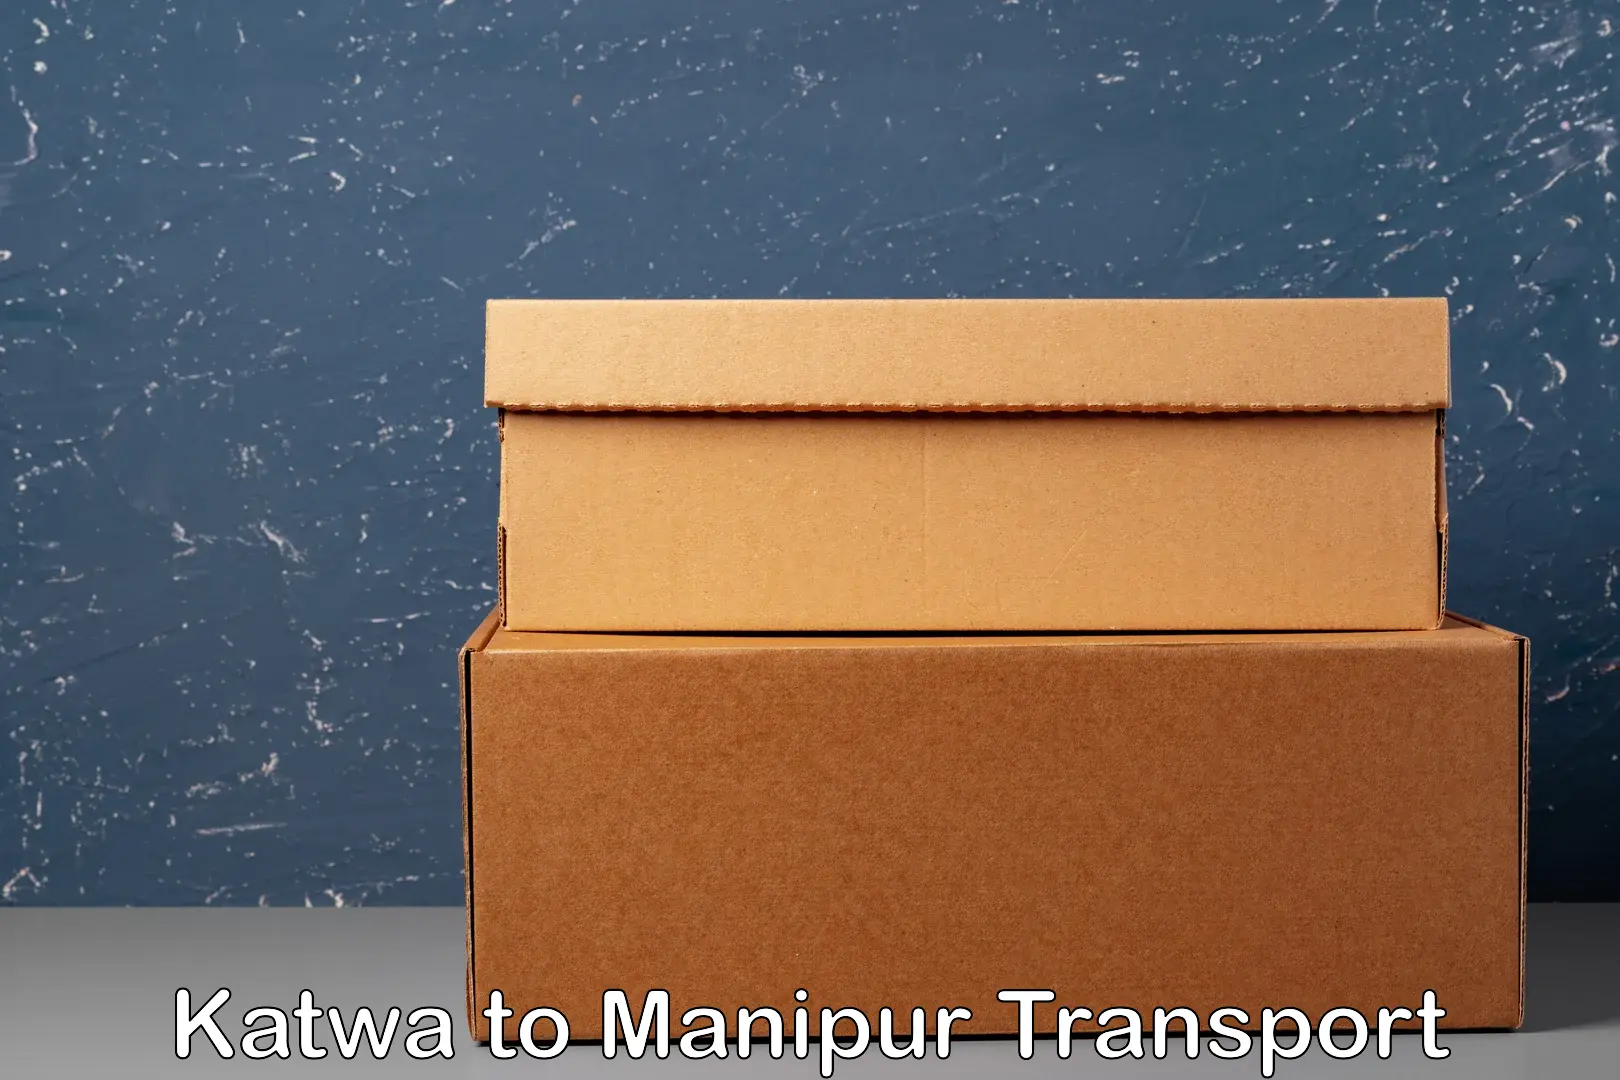 Nearby transport service Katwa to Manipur